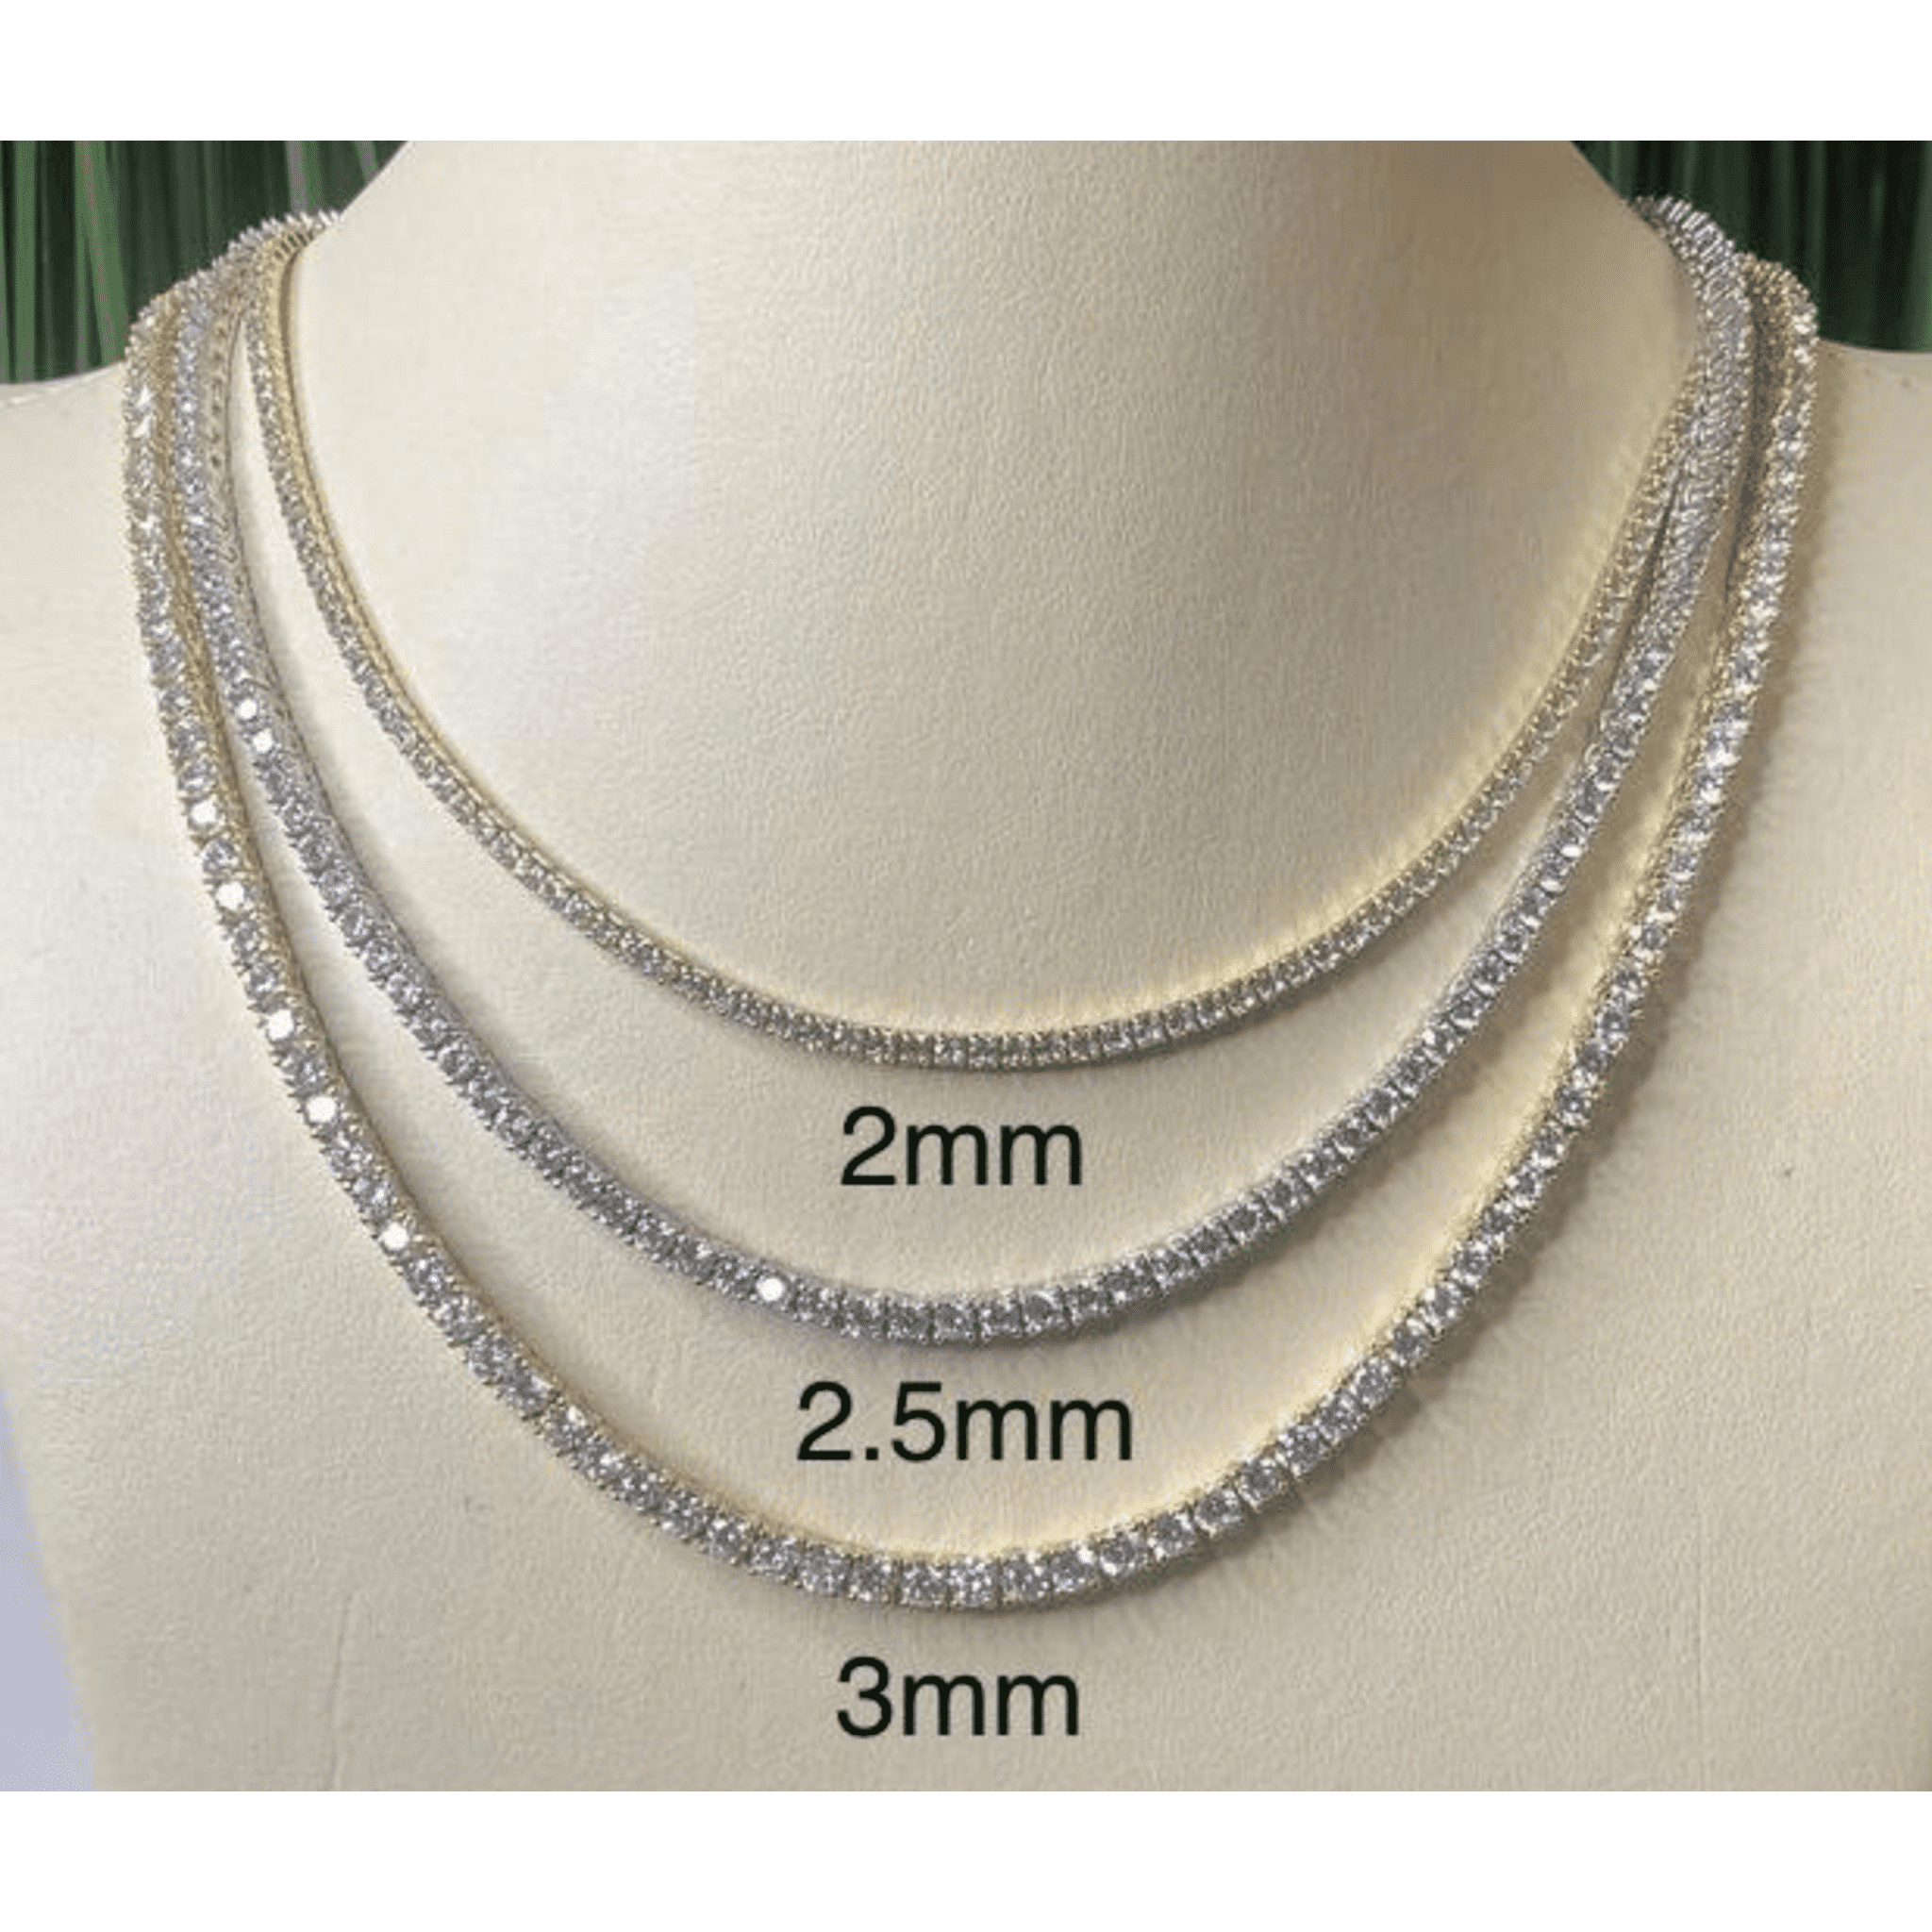 2.5mm Classic Tennis Necklace